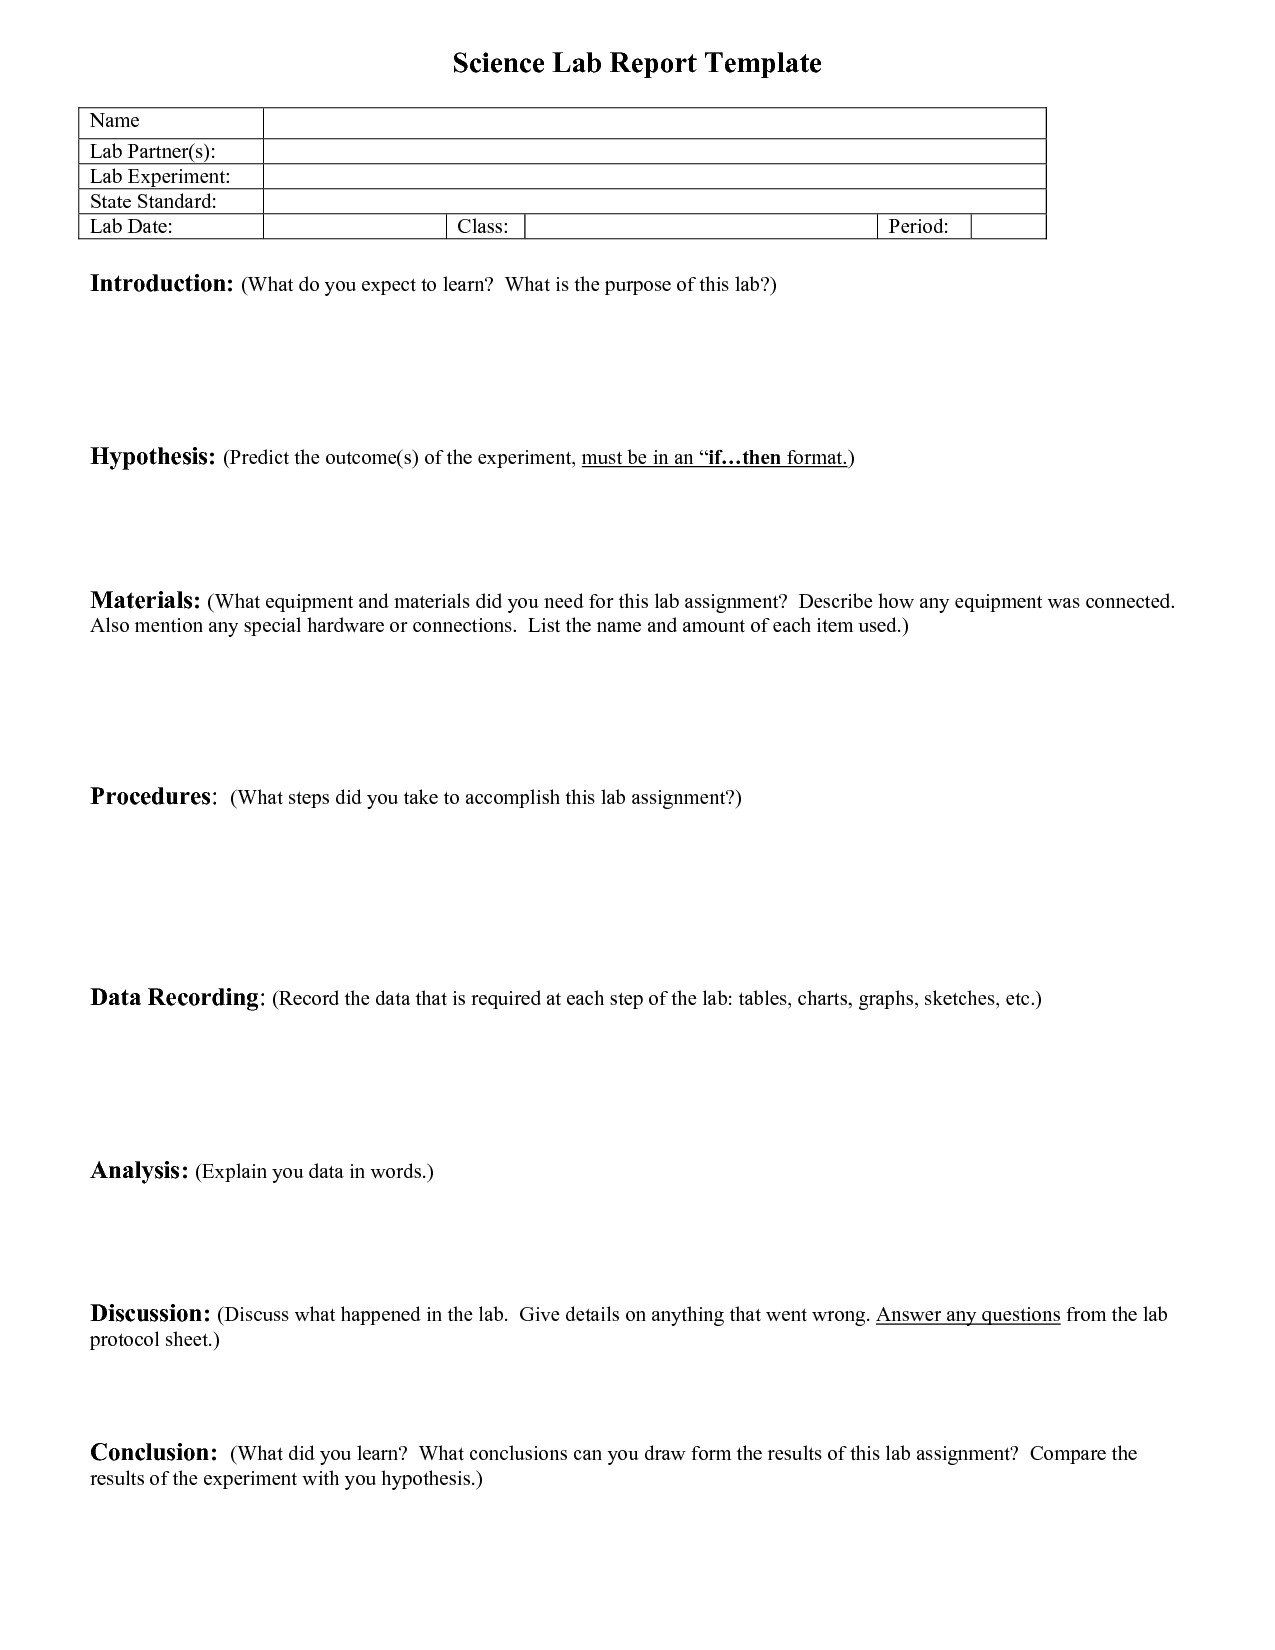 Mythbusters Penny Drop Worksheet Answers Luxury Worksheets Sample For Mythbusters Penny Drop Worksheet Answers